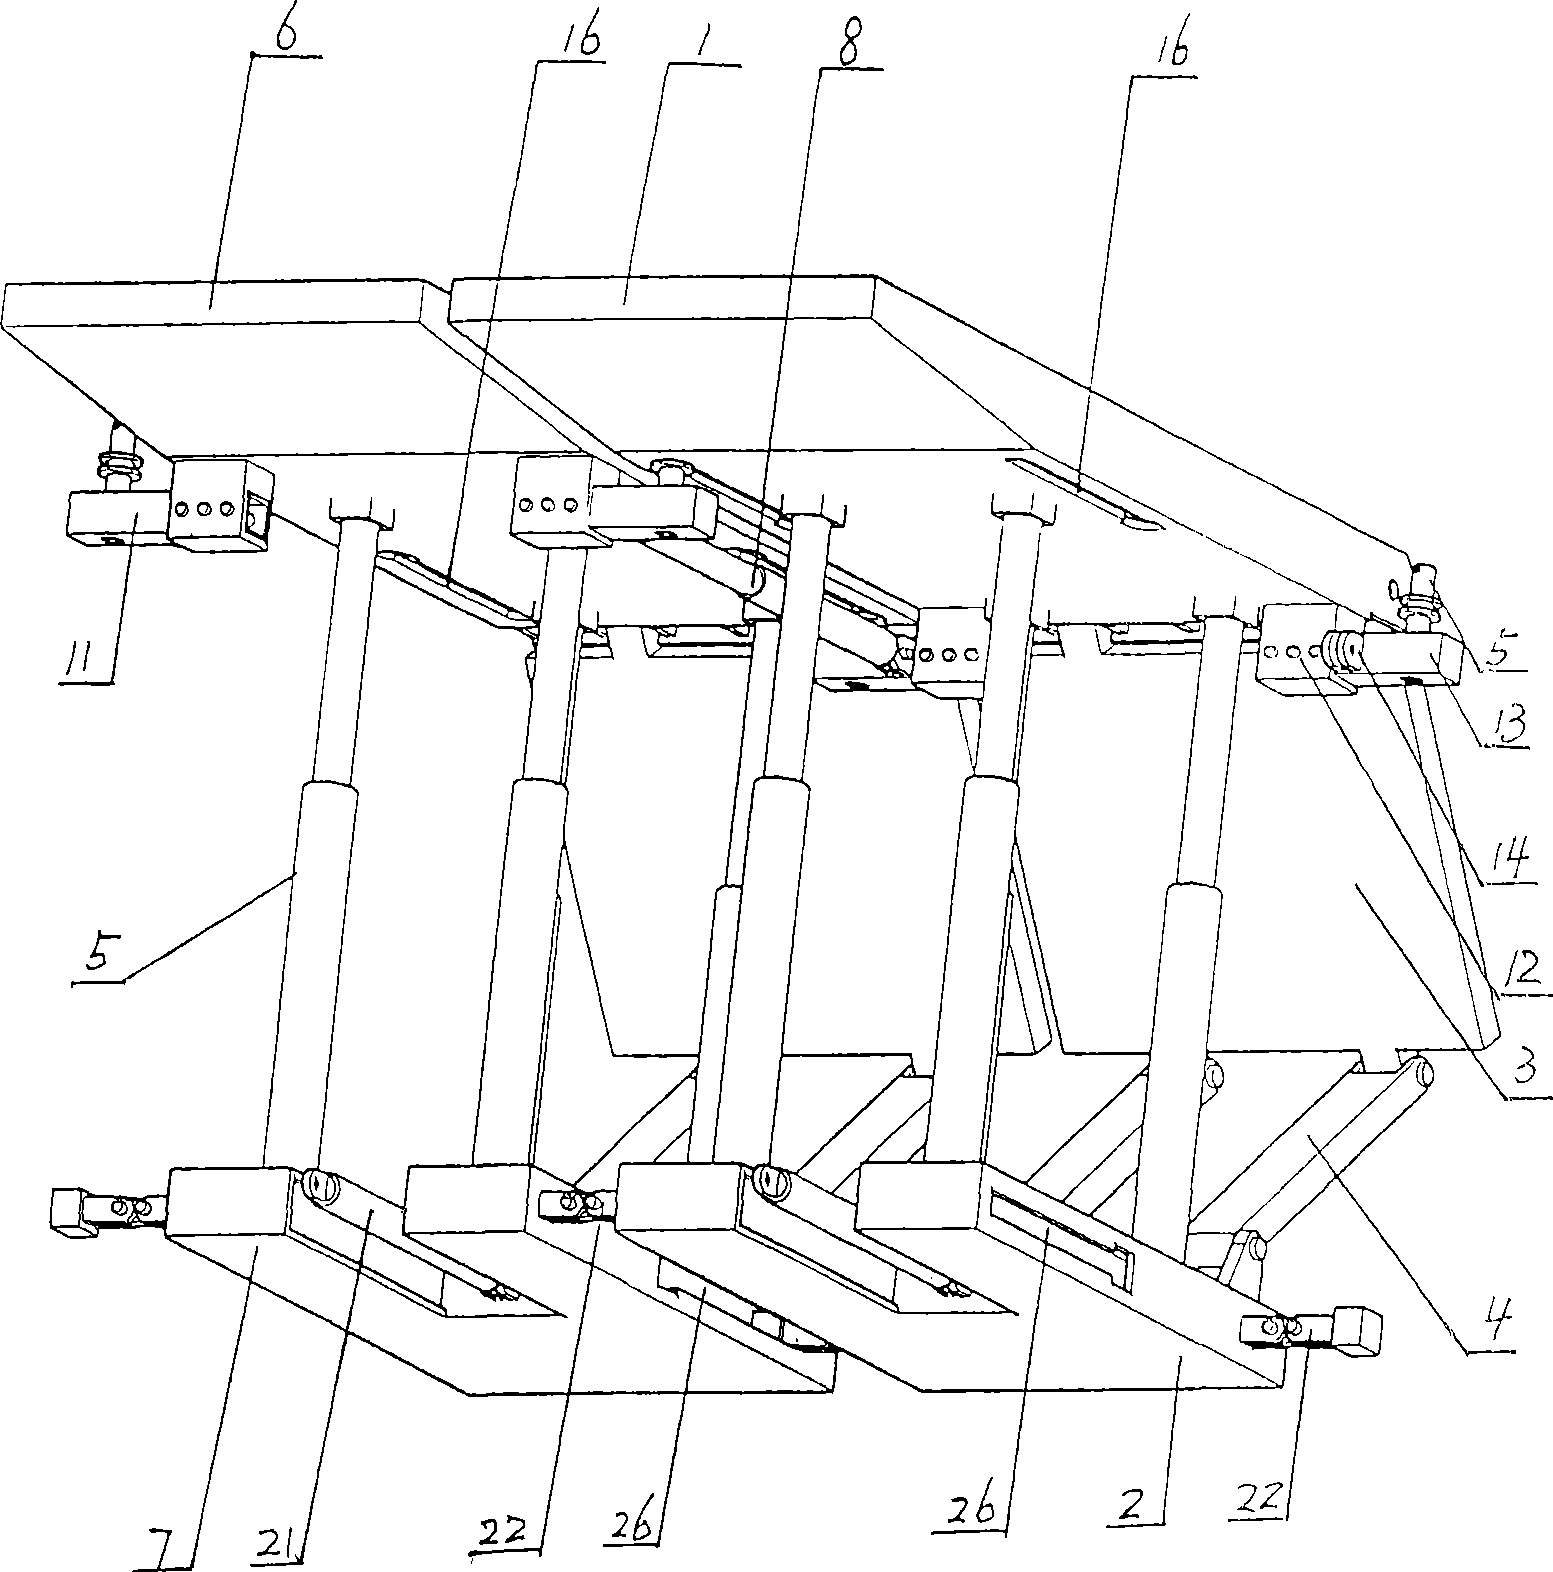 Hydraulic bracket with interconnected top and bottom